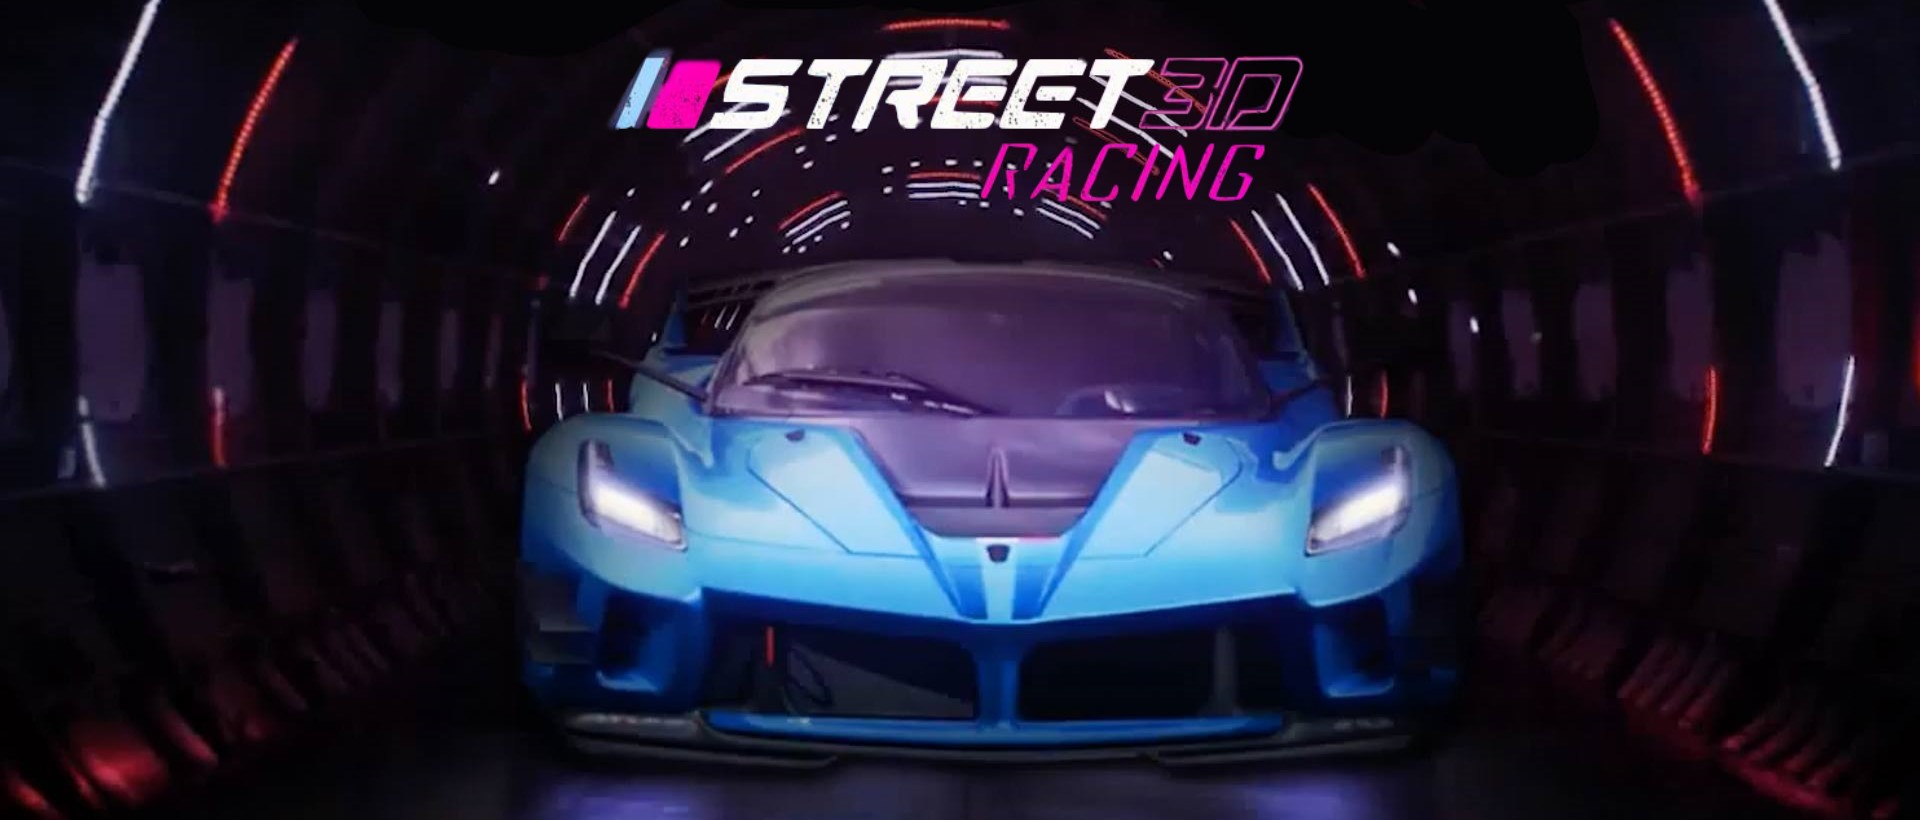 Download Street Racing Hd On Pc With Noxplayer Appcenter